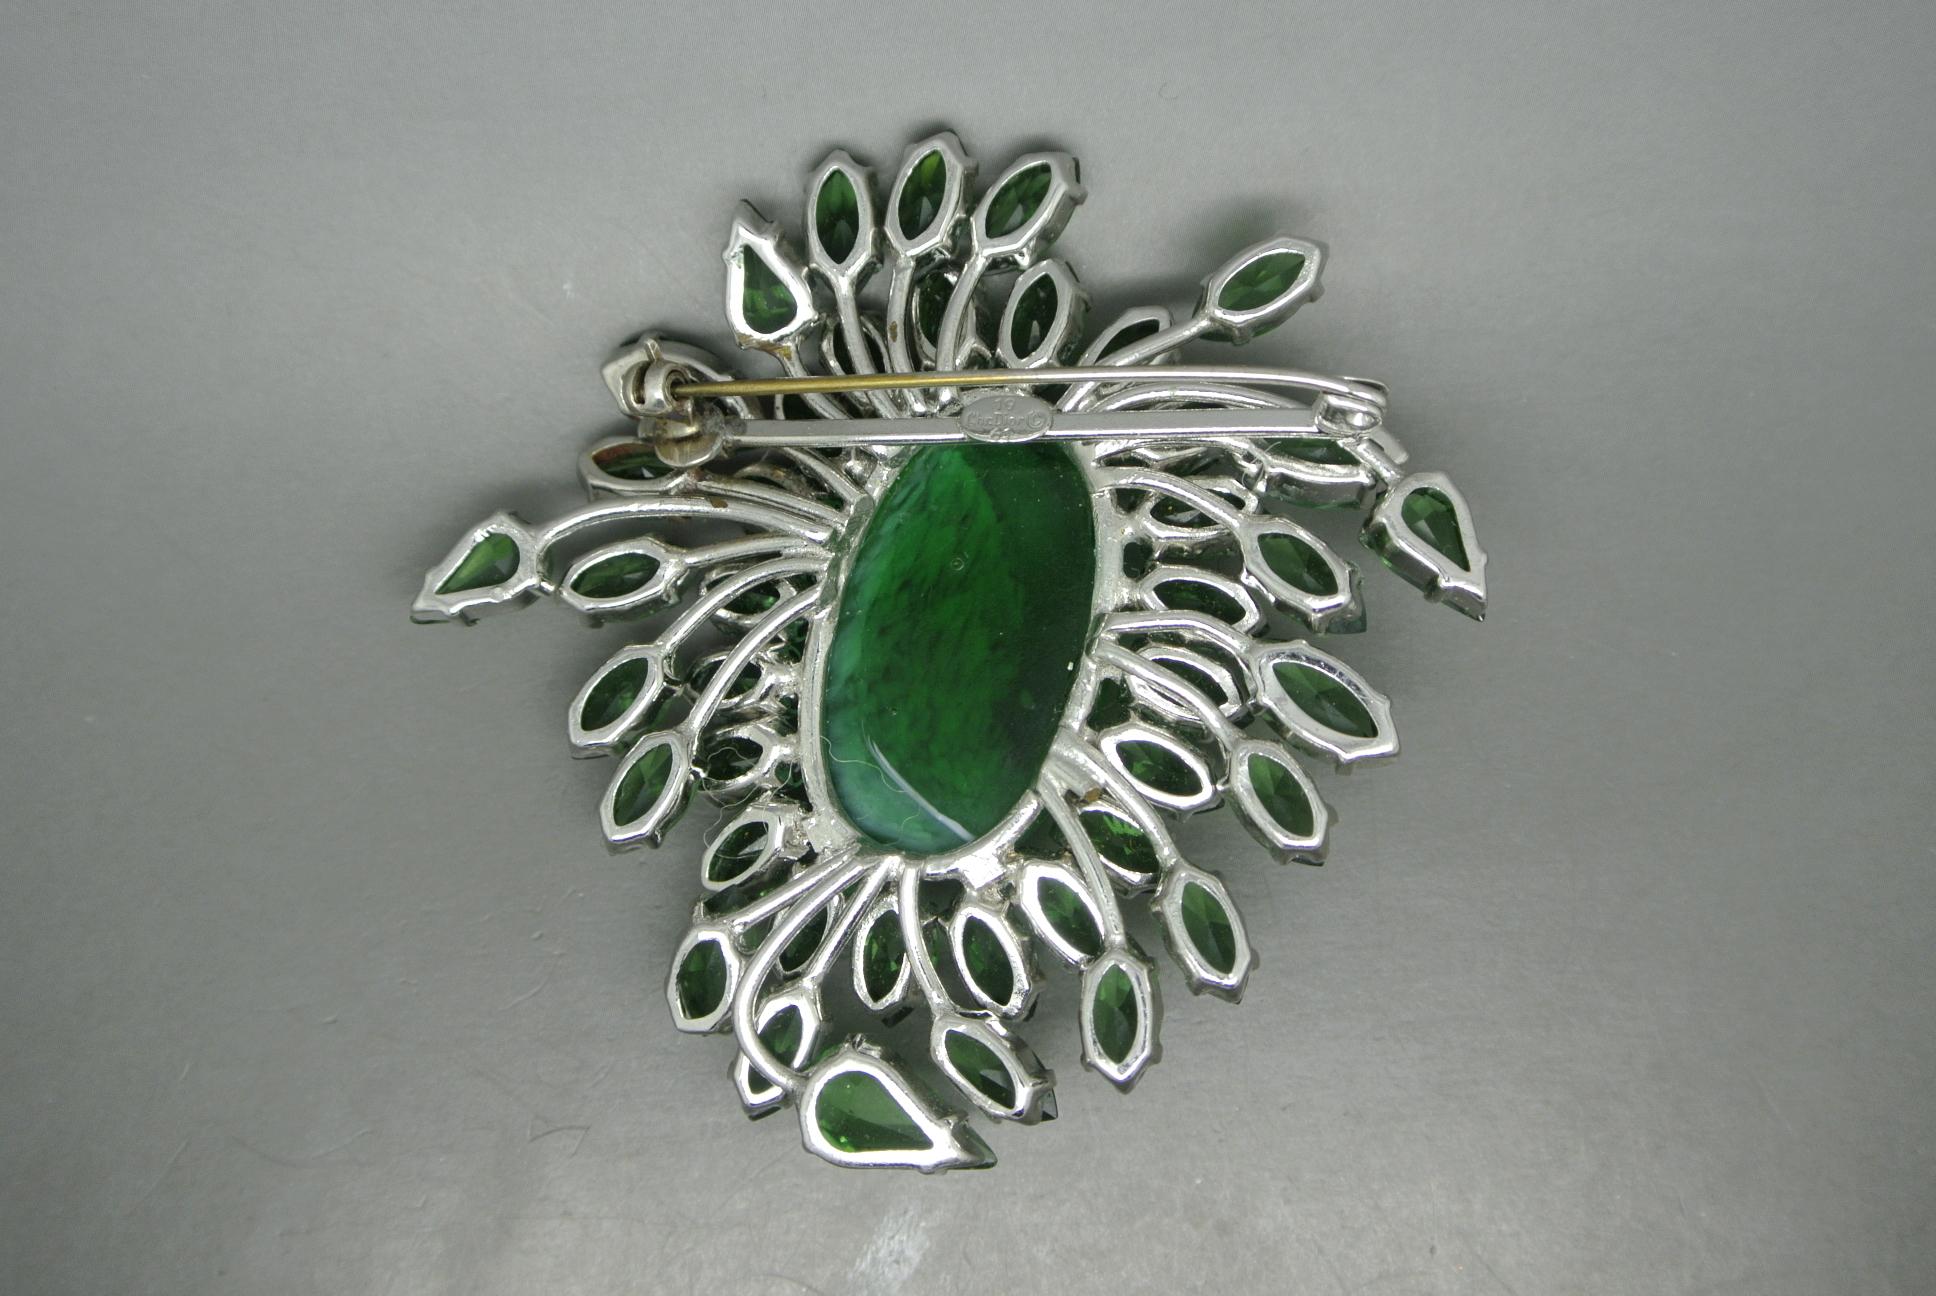 Christian Dior Brooch
Signed and dated 1961
Made by Henkel&Grosse Company